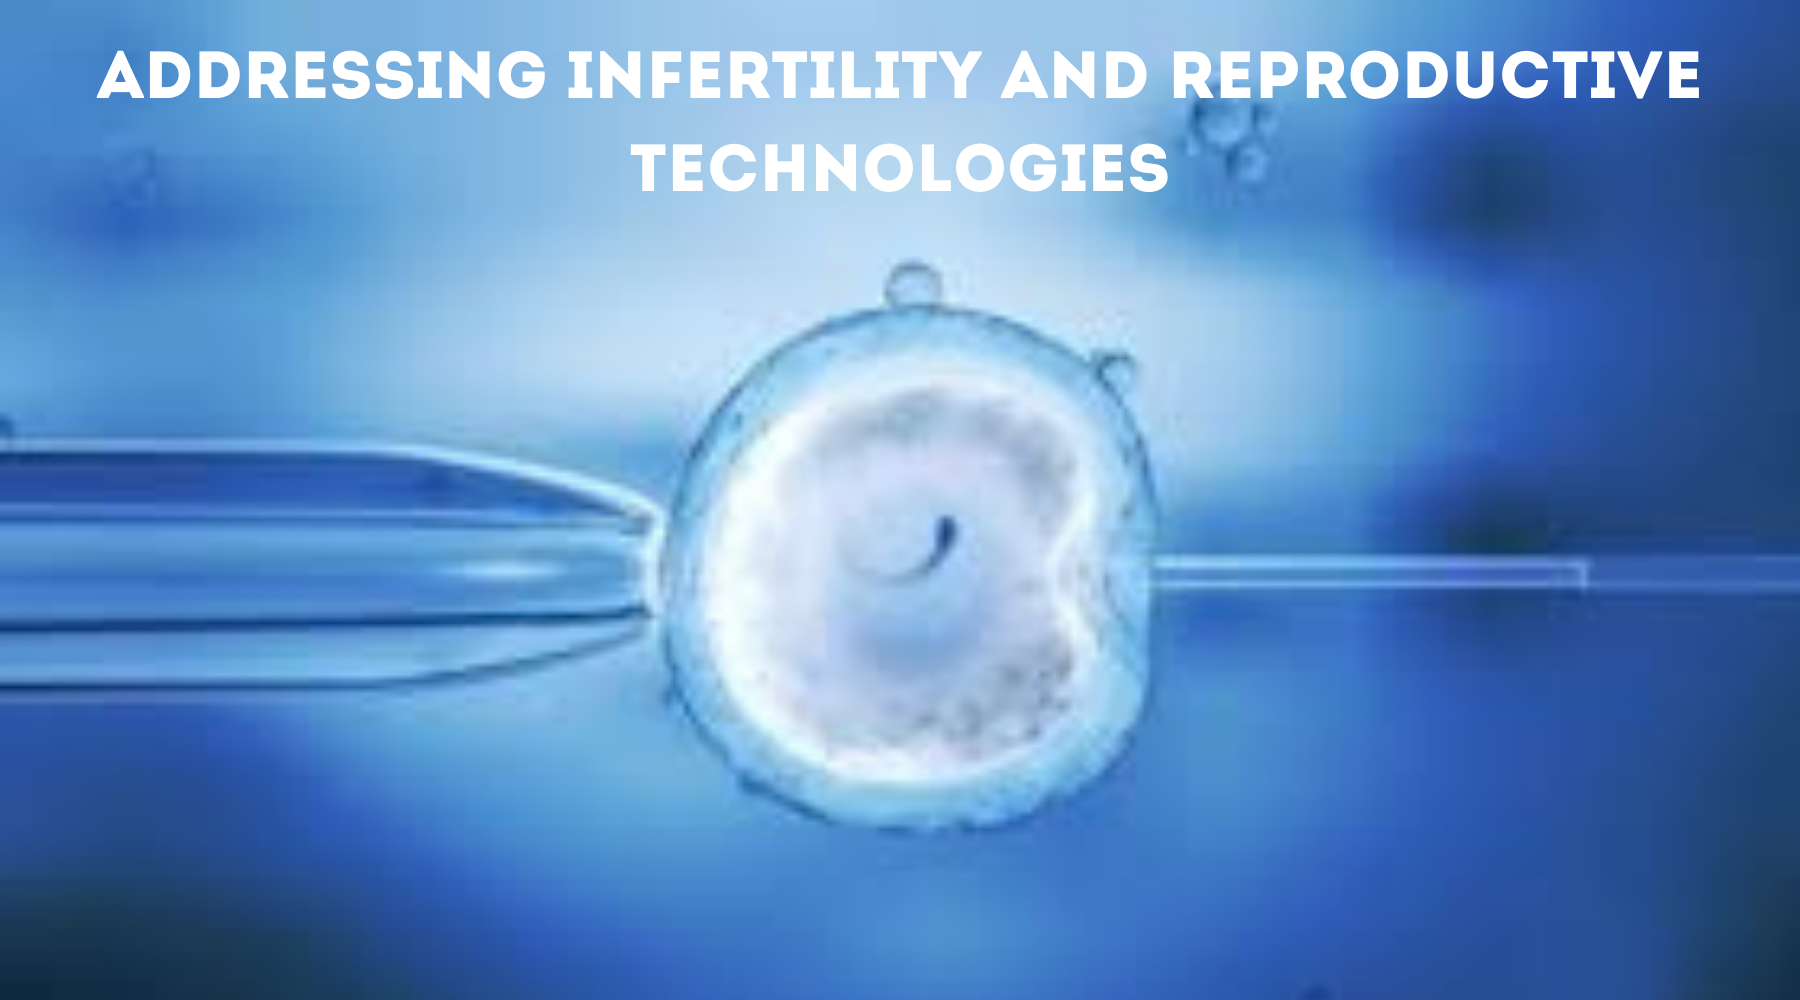 ADDRESSING INFERTILITY AND REPRODUCTIVE TECHNOLOGIES